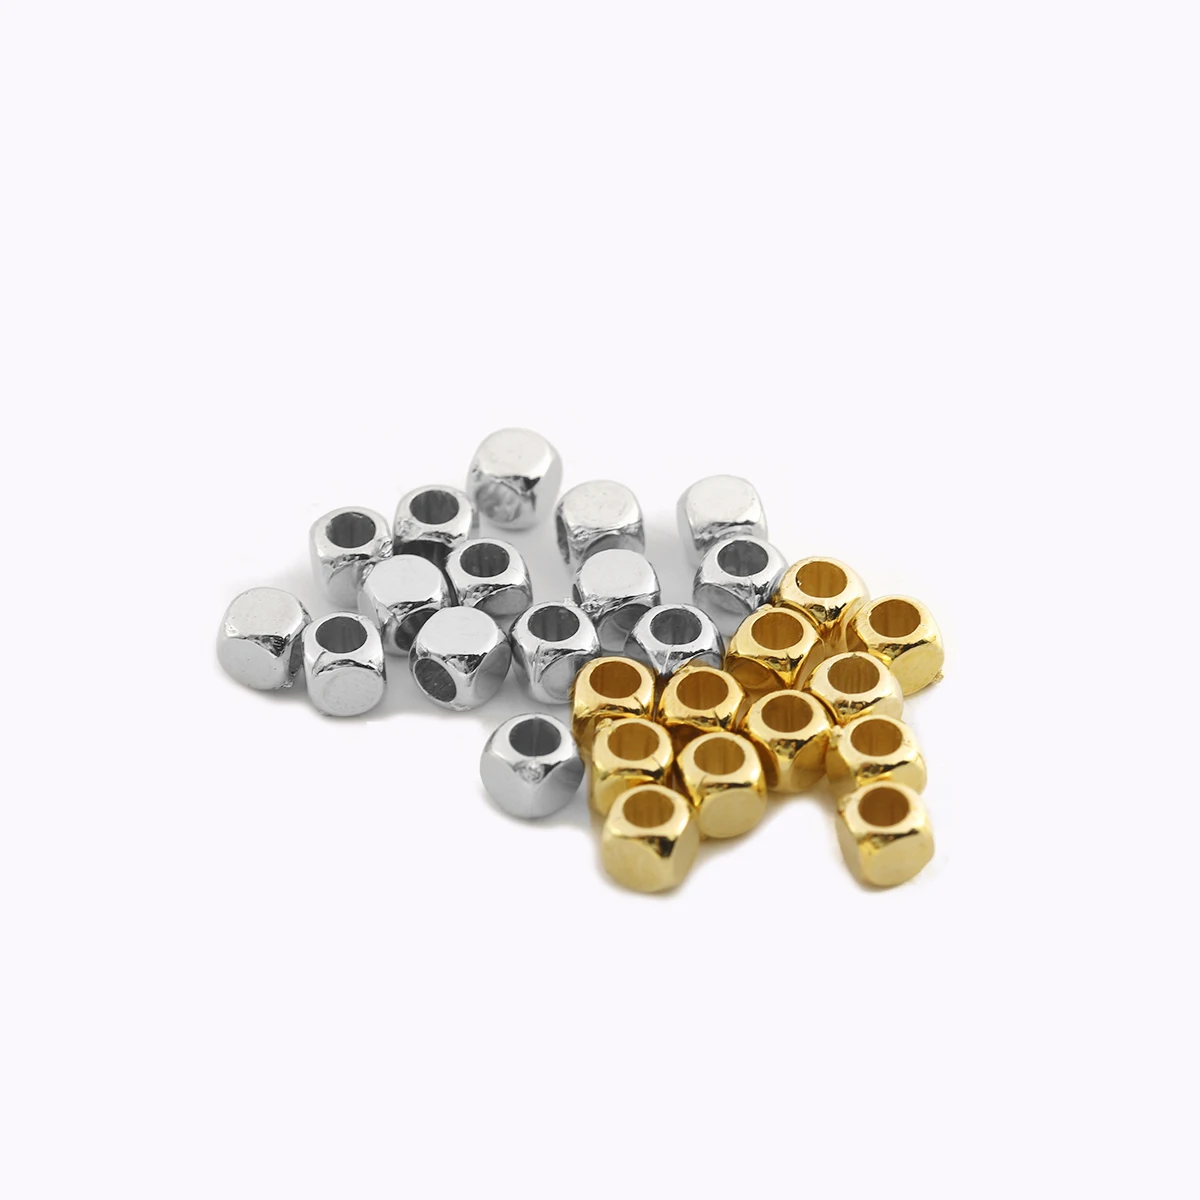 

200pcs/lot CCB Square Big Hole Spacer Beads 4mm 5mm Out Diameter 2.5mm Inner Diameter Gold Color Loose Bead DIY Jewelry Miking